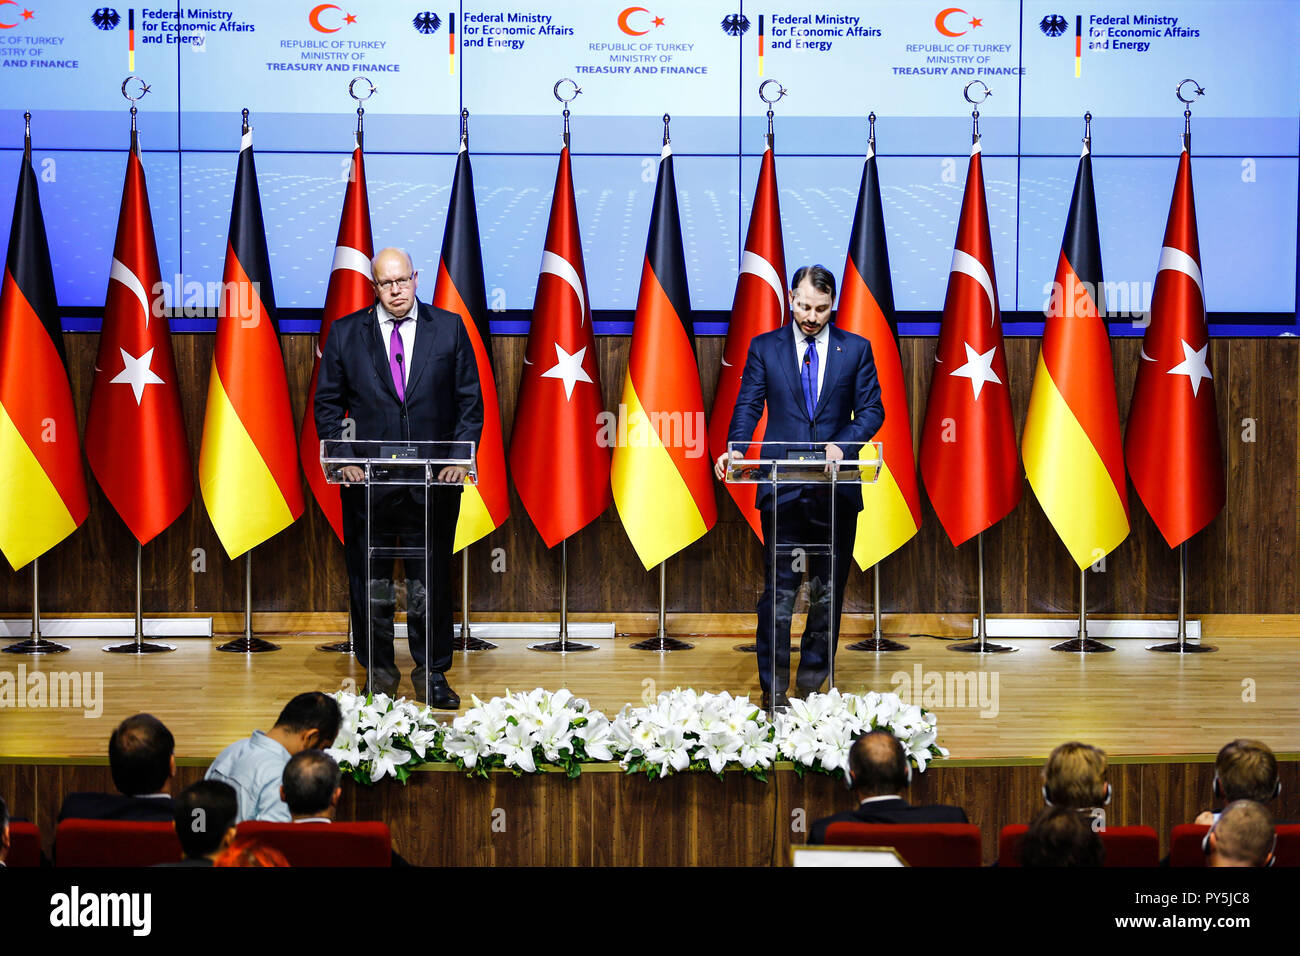 Ankara, Turkey. 25th Oct, 2018. Turkish Minister of Finance and Treasury Berat Albayrak (R) speaks during a press conference with German Minister for Economic Affairs and Energy Peter Altmaier after their meeting. Credit: Ahmed Deeb/dpa/Alamy Live News Stock Photo